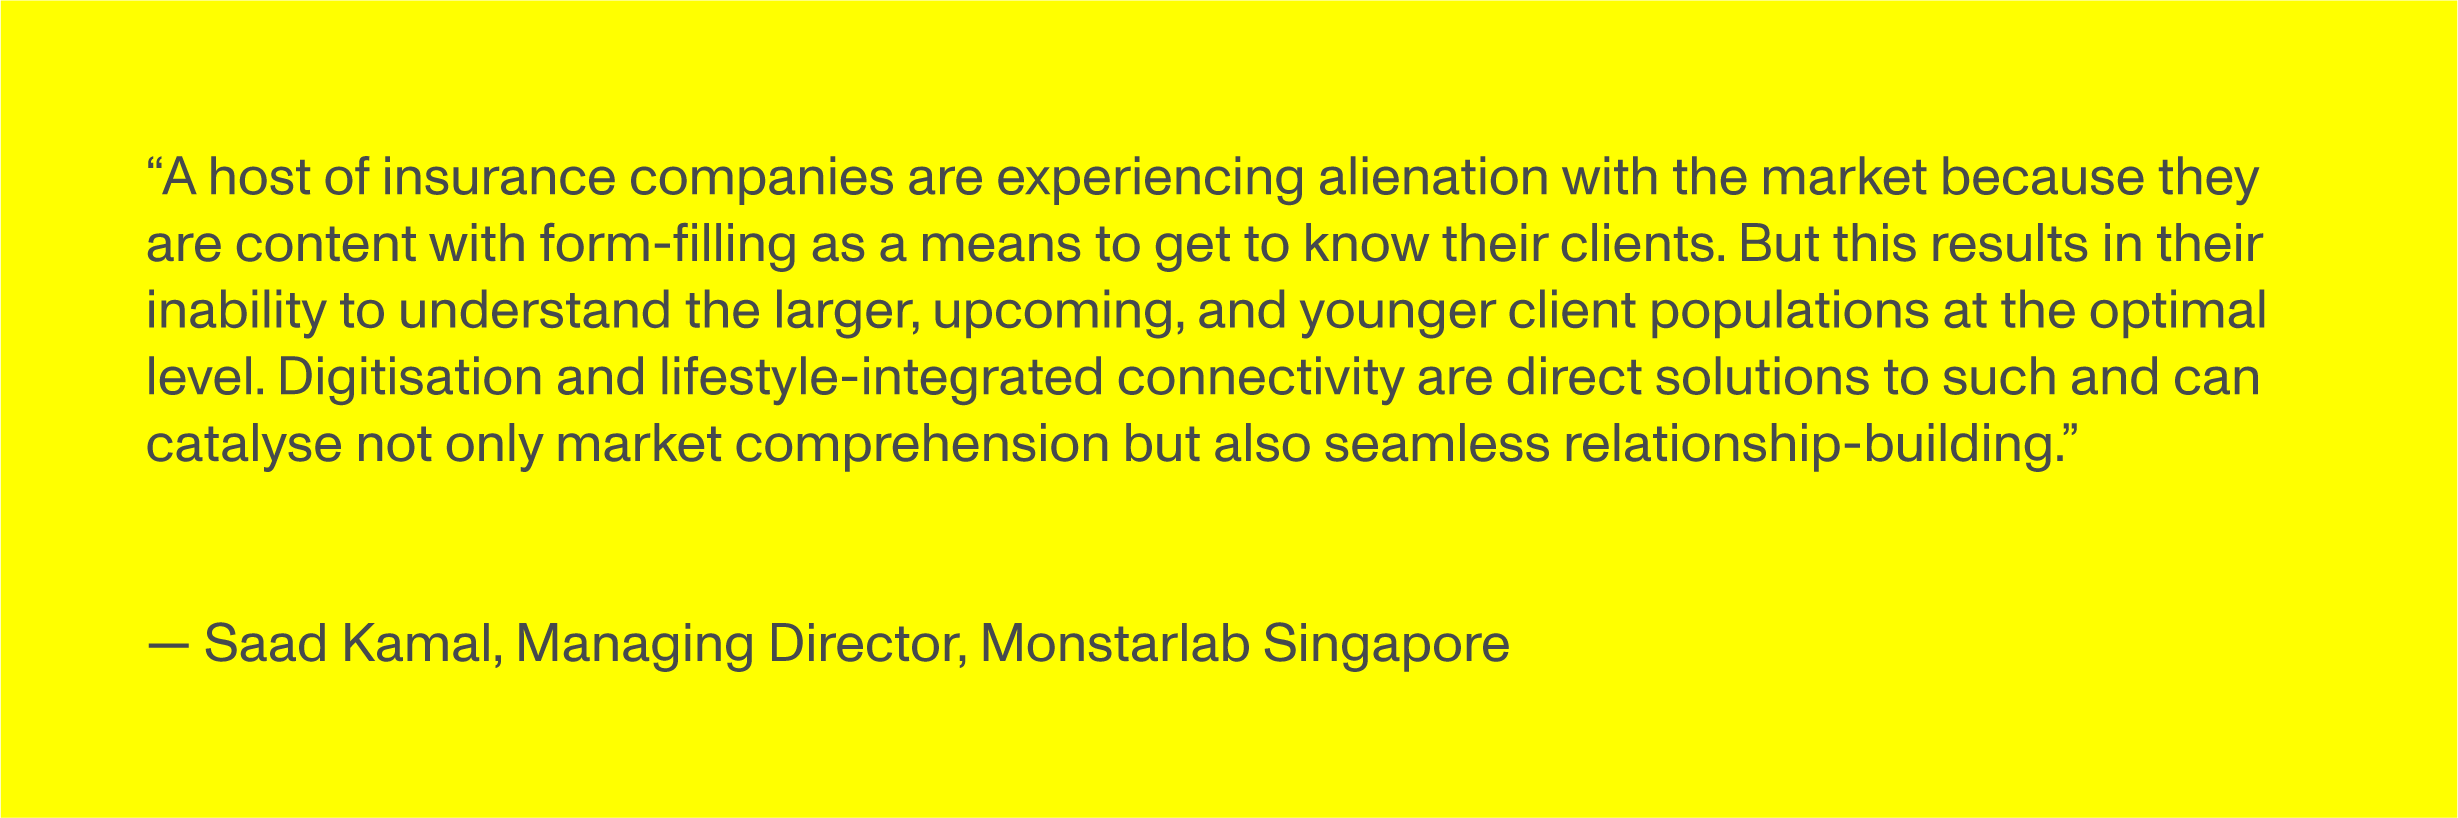 “A host of insurance companies are experiencing alienation with the market because they are content with form-filling as a means to get to know their clients. But this results in their inability to understand the larger, upcoming, and younger client populations at the optimal level. Digitisation and lifestyle-integrated connectivity are direct solutions to such and can catalyse not only market comprehension but also seamless relationship-building.” - Saad Kamal, Managing Director, Monstarlab Singapore